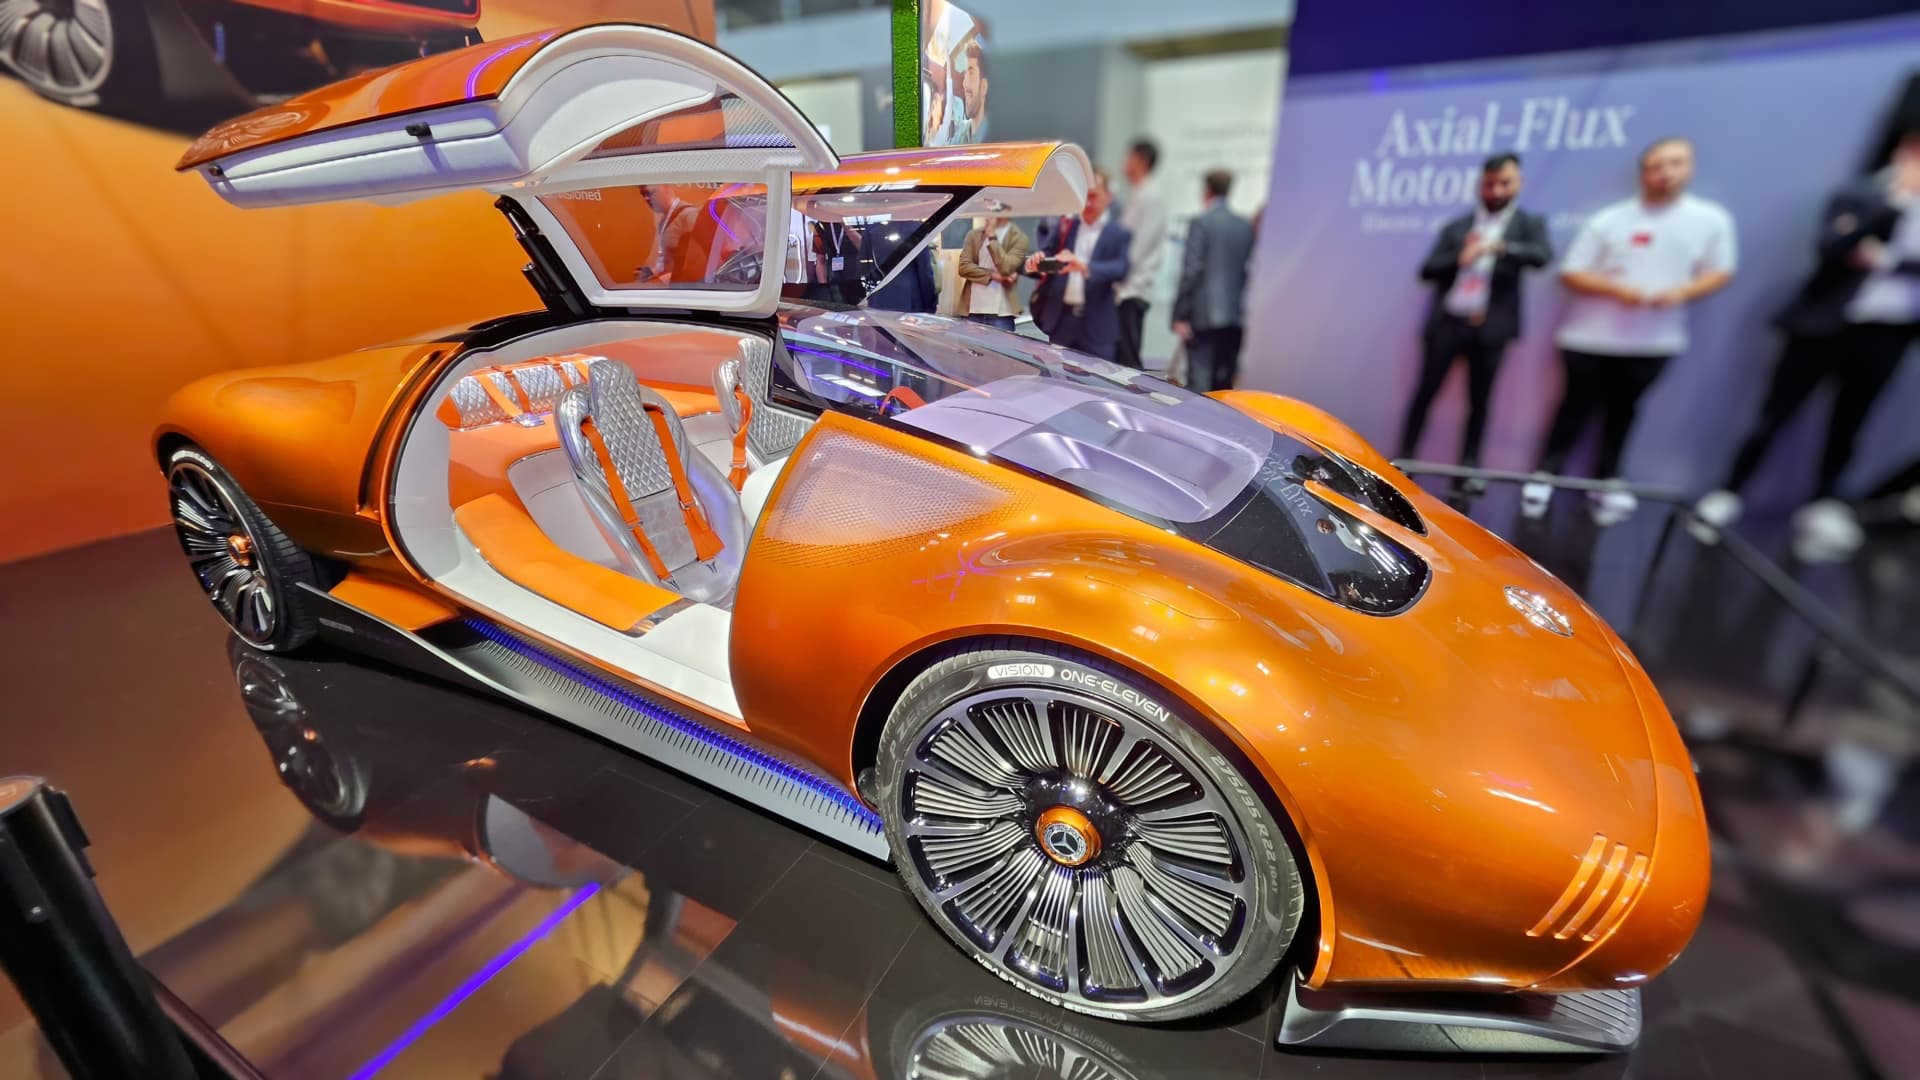 From BMW to Porsche: Take a look at the cars on display at one of the world's biggest auto shows